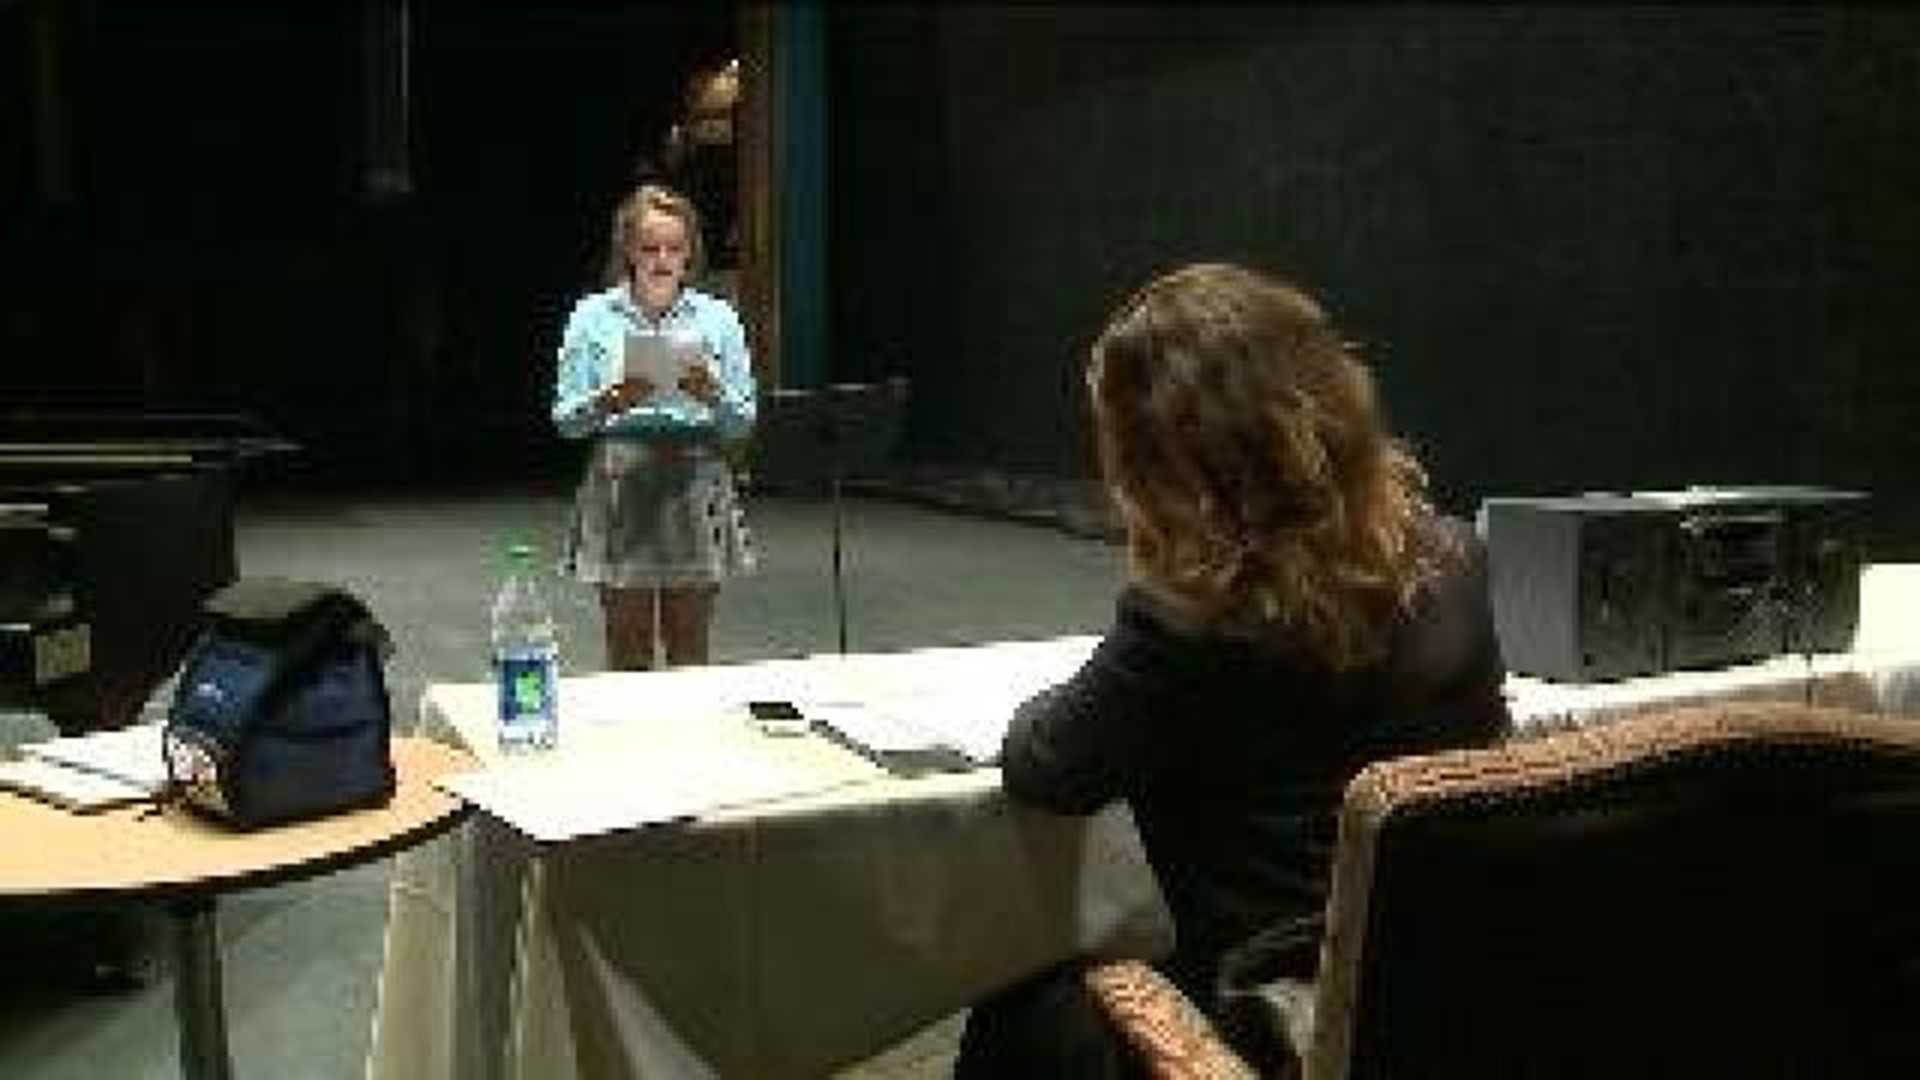 Local Singers Audition for “Happy Elf” Musical